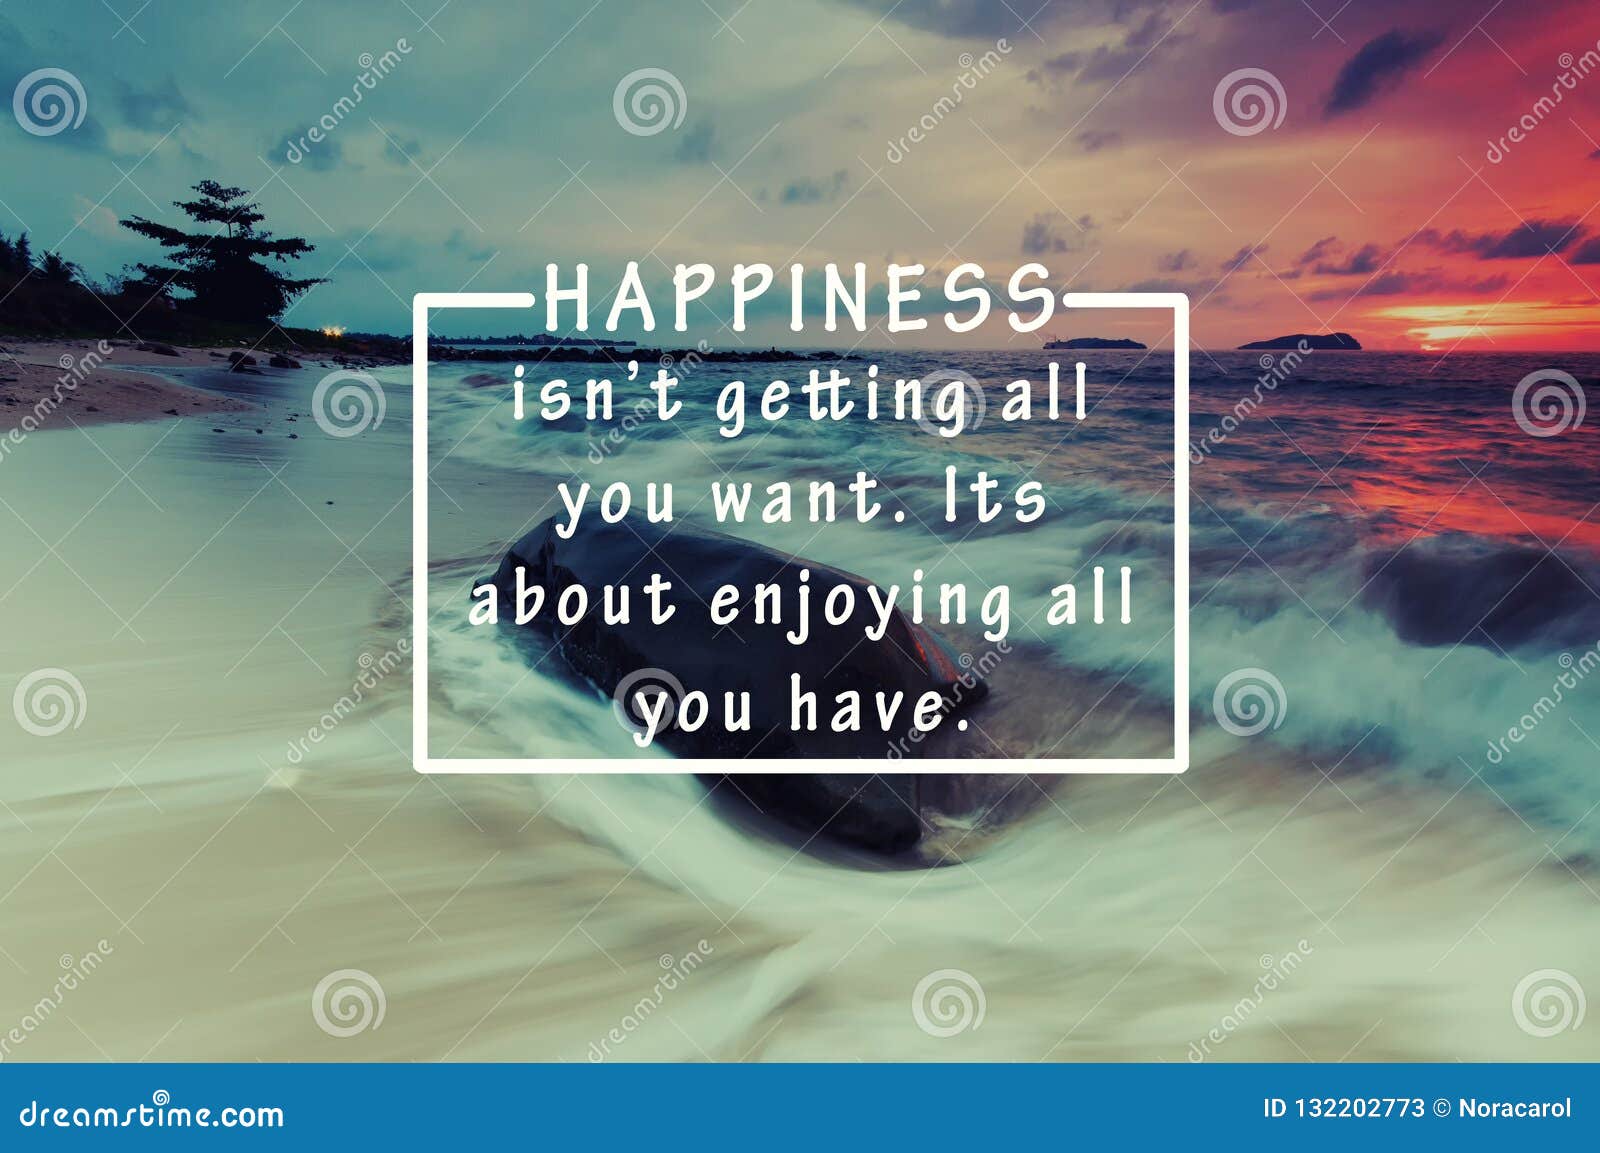 Happy Moments Quotes Photos and Images